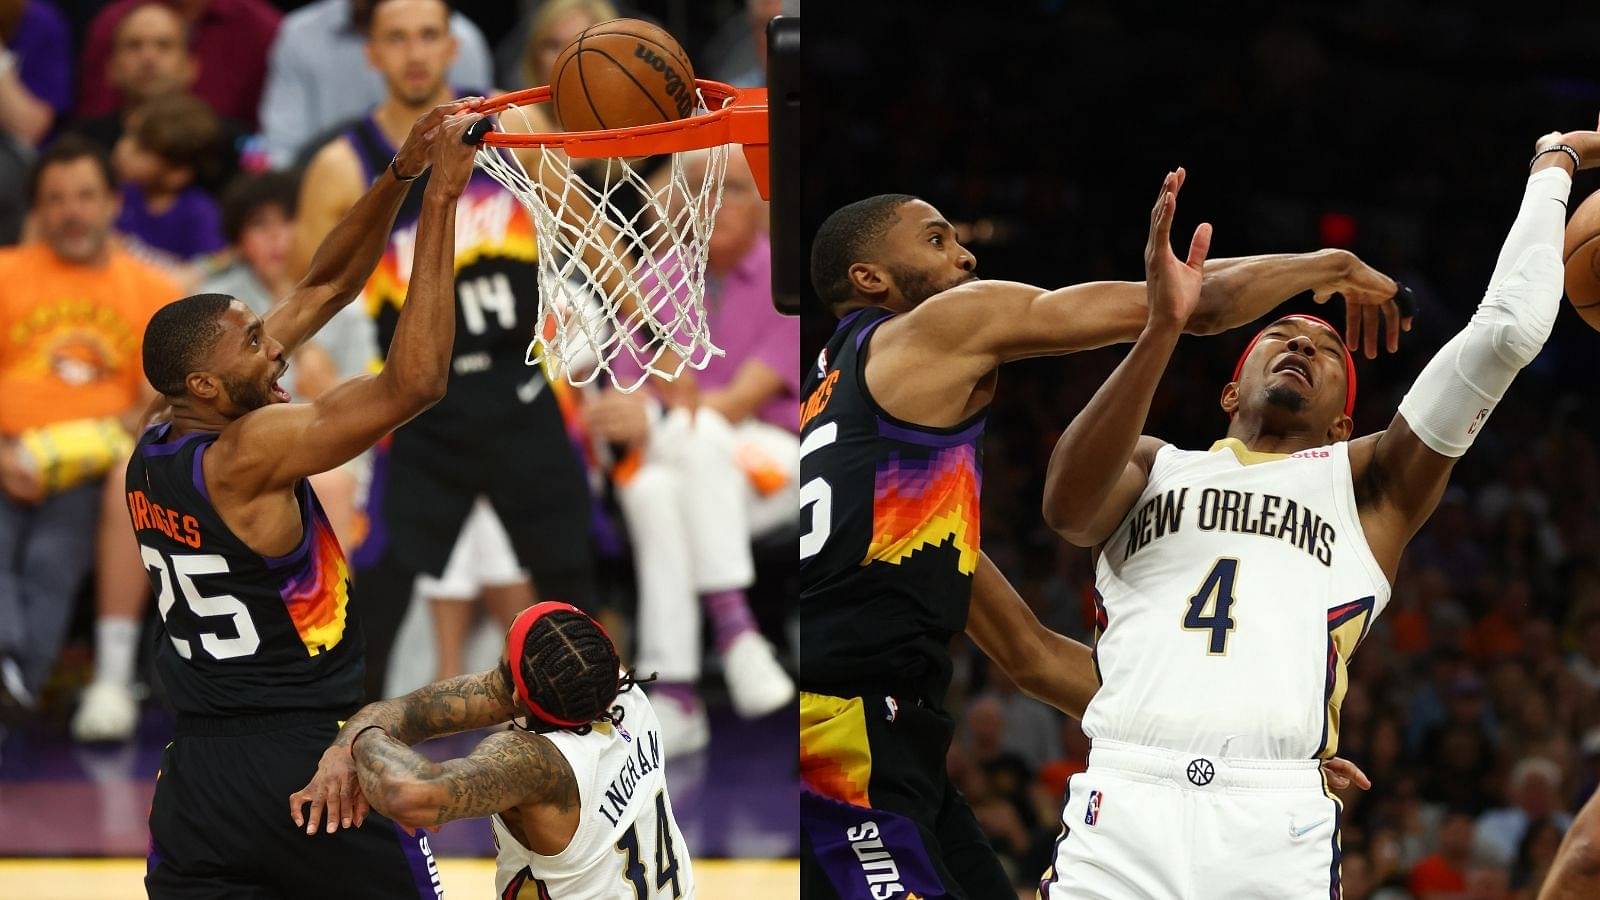 "Mikal Bridges made 12/17 for 31 points, players he guarded made 3/17 for 7 points": New Orleans Pelicans are shooting 36% in the series against Suns' defensive juggernaut